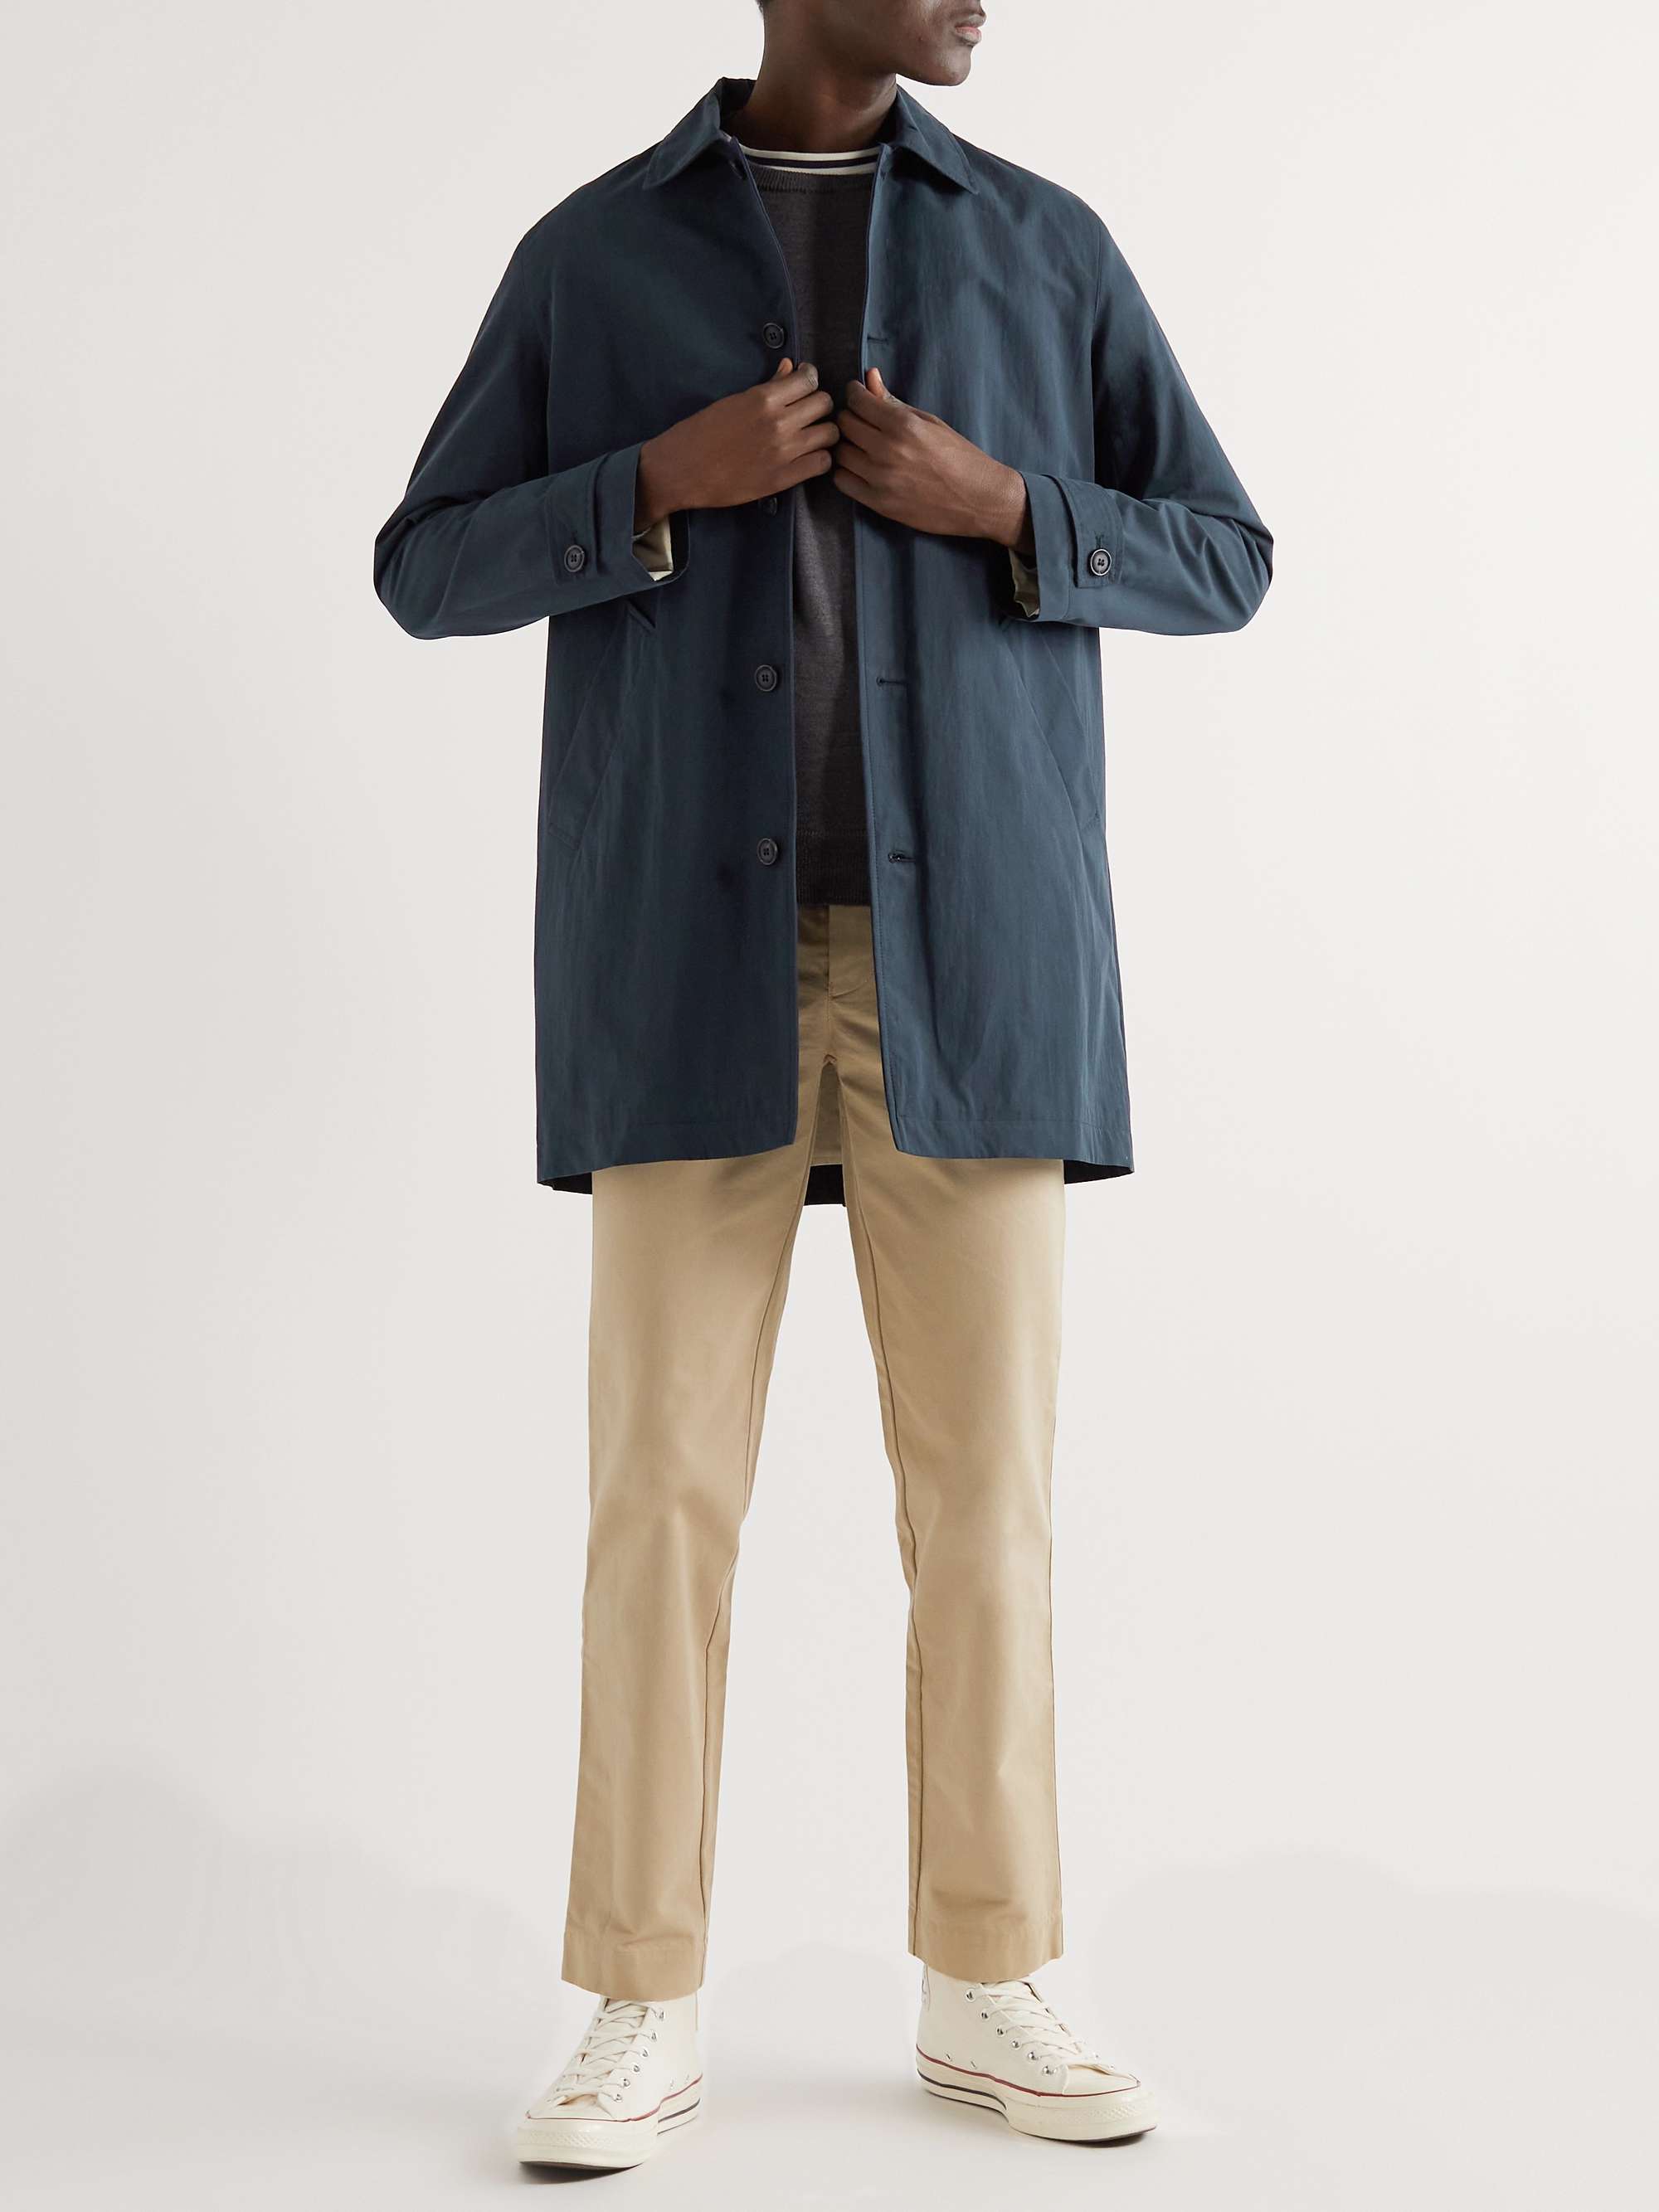 A.P.C. Victor Slim-Fit Cotton-Blend Trench Coat